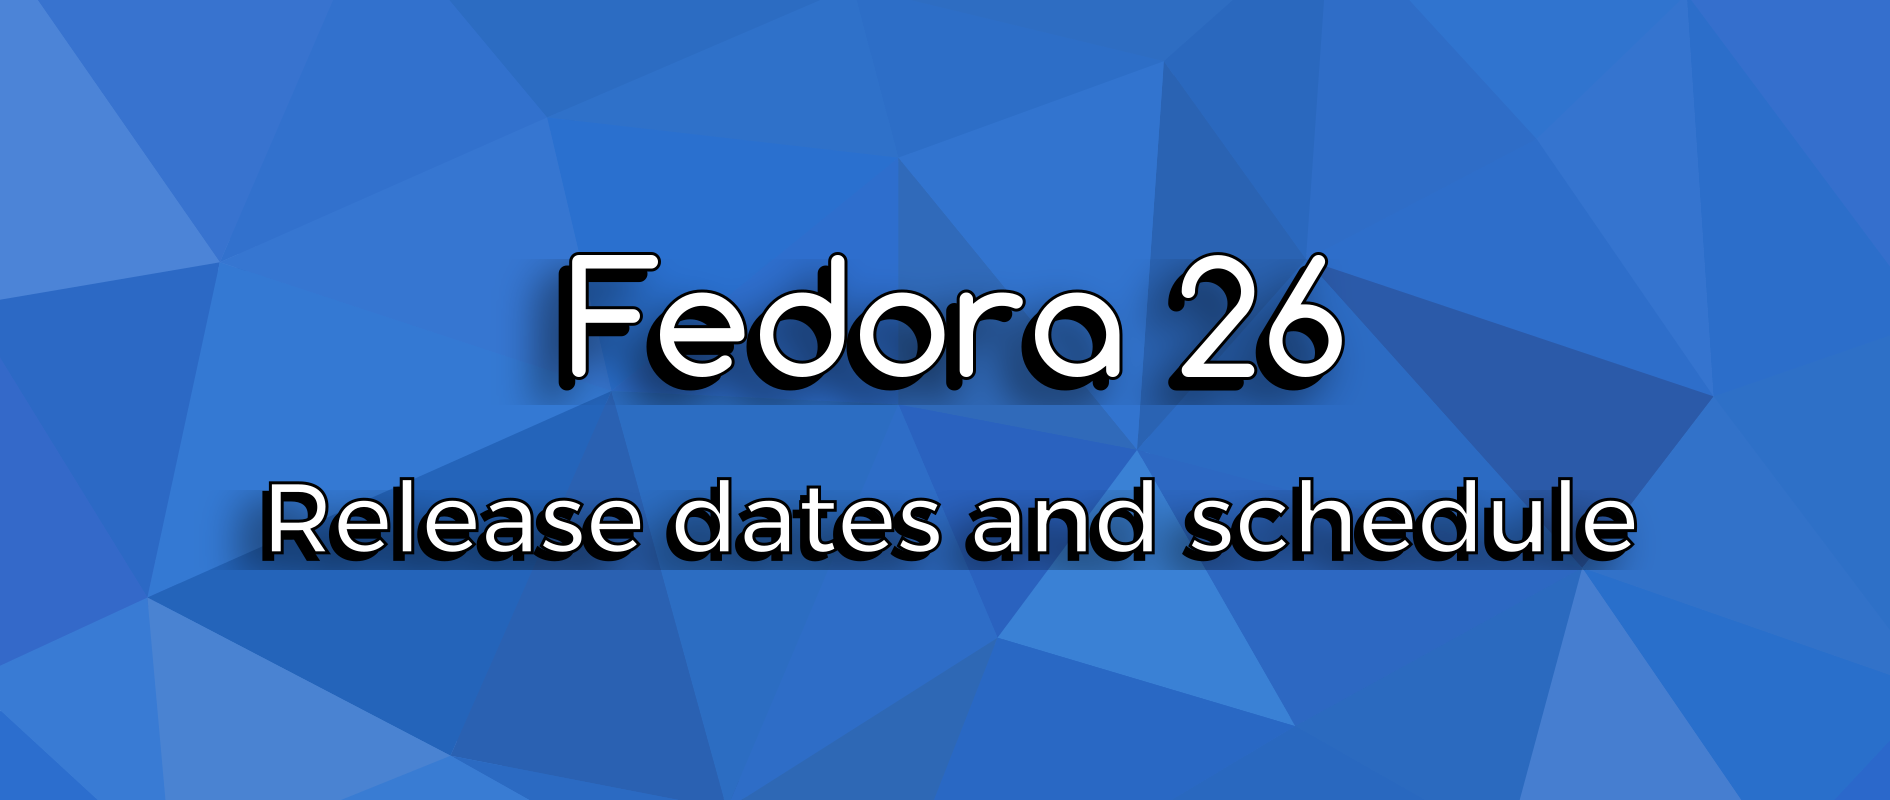 Fedora 26 release dates and schedule